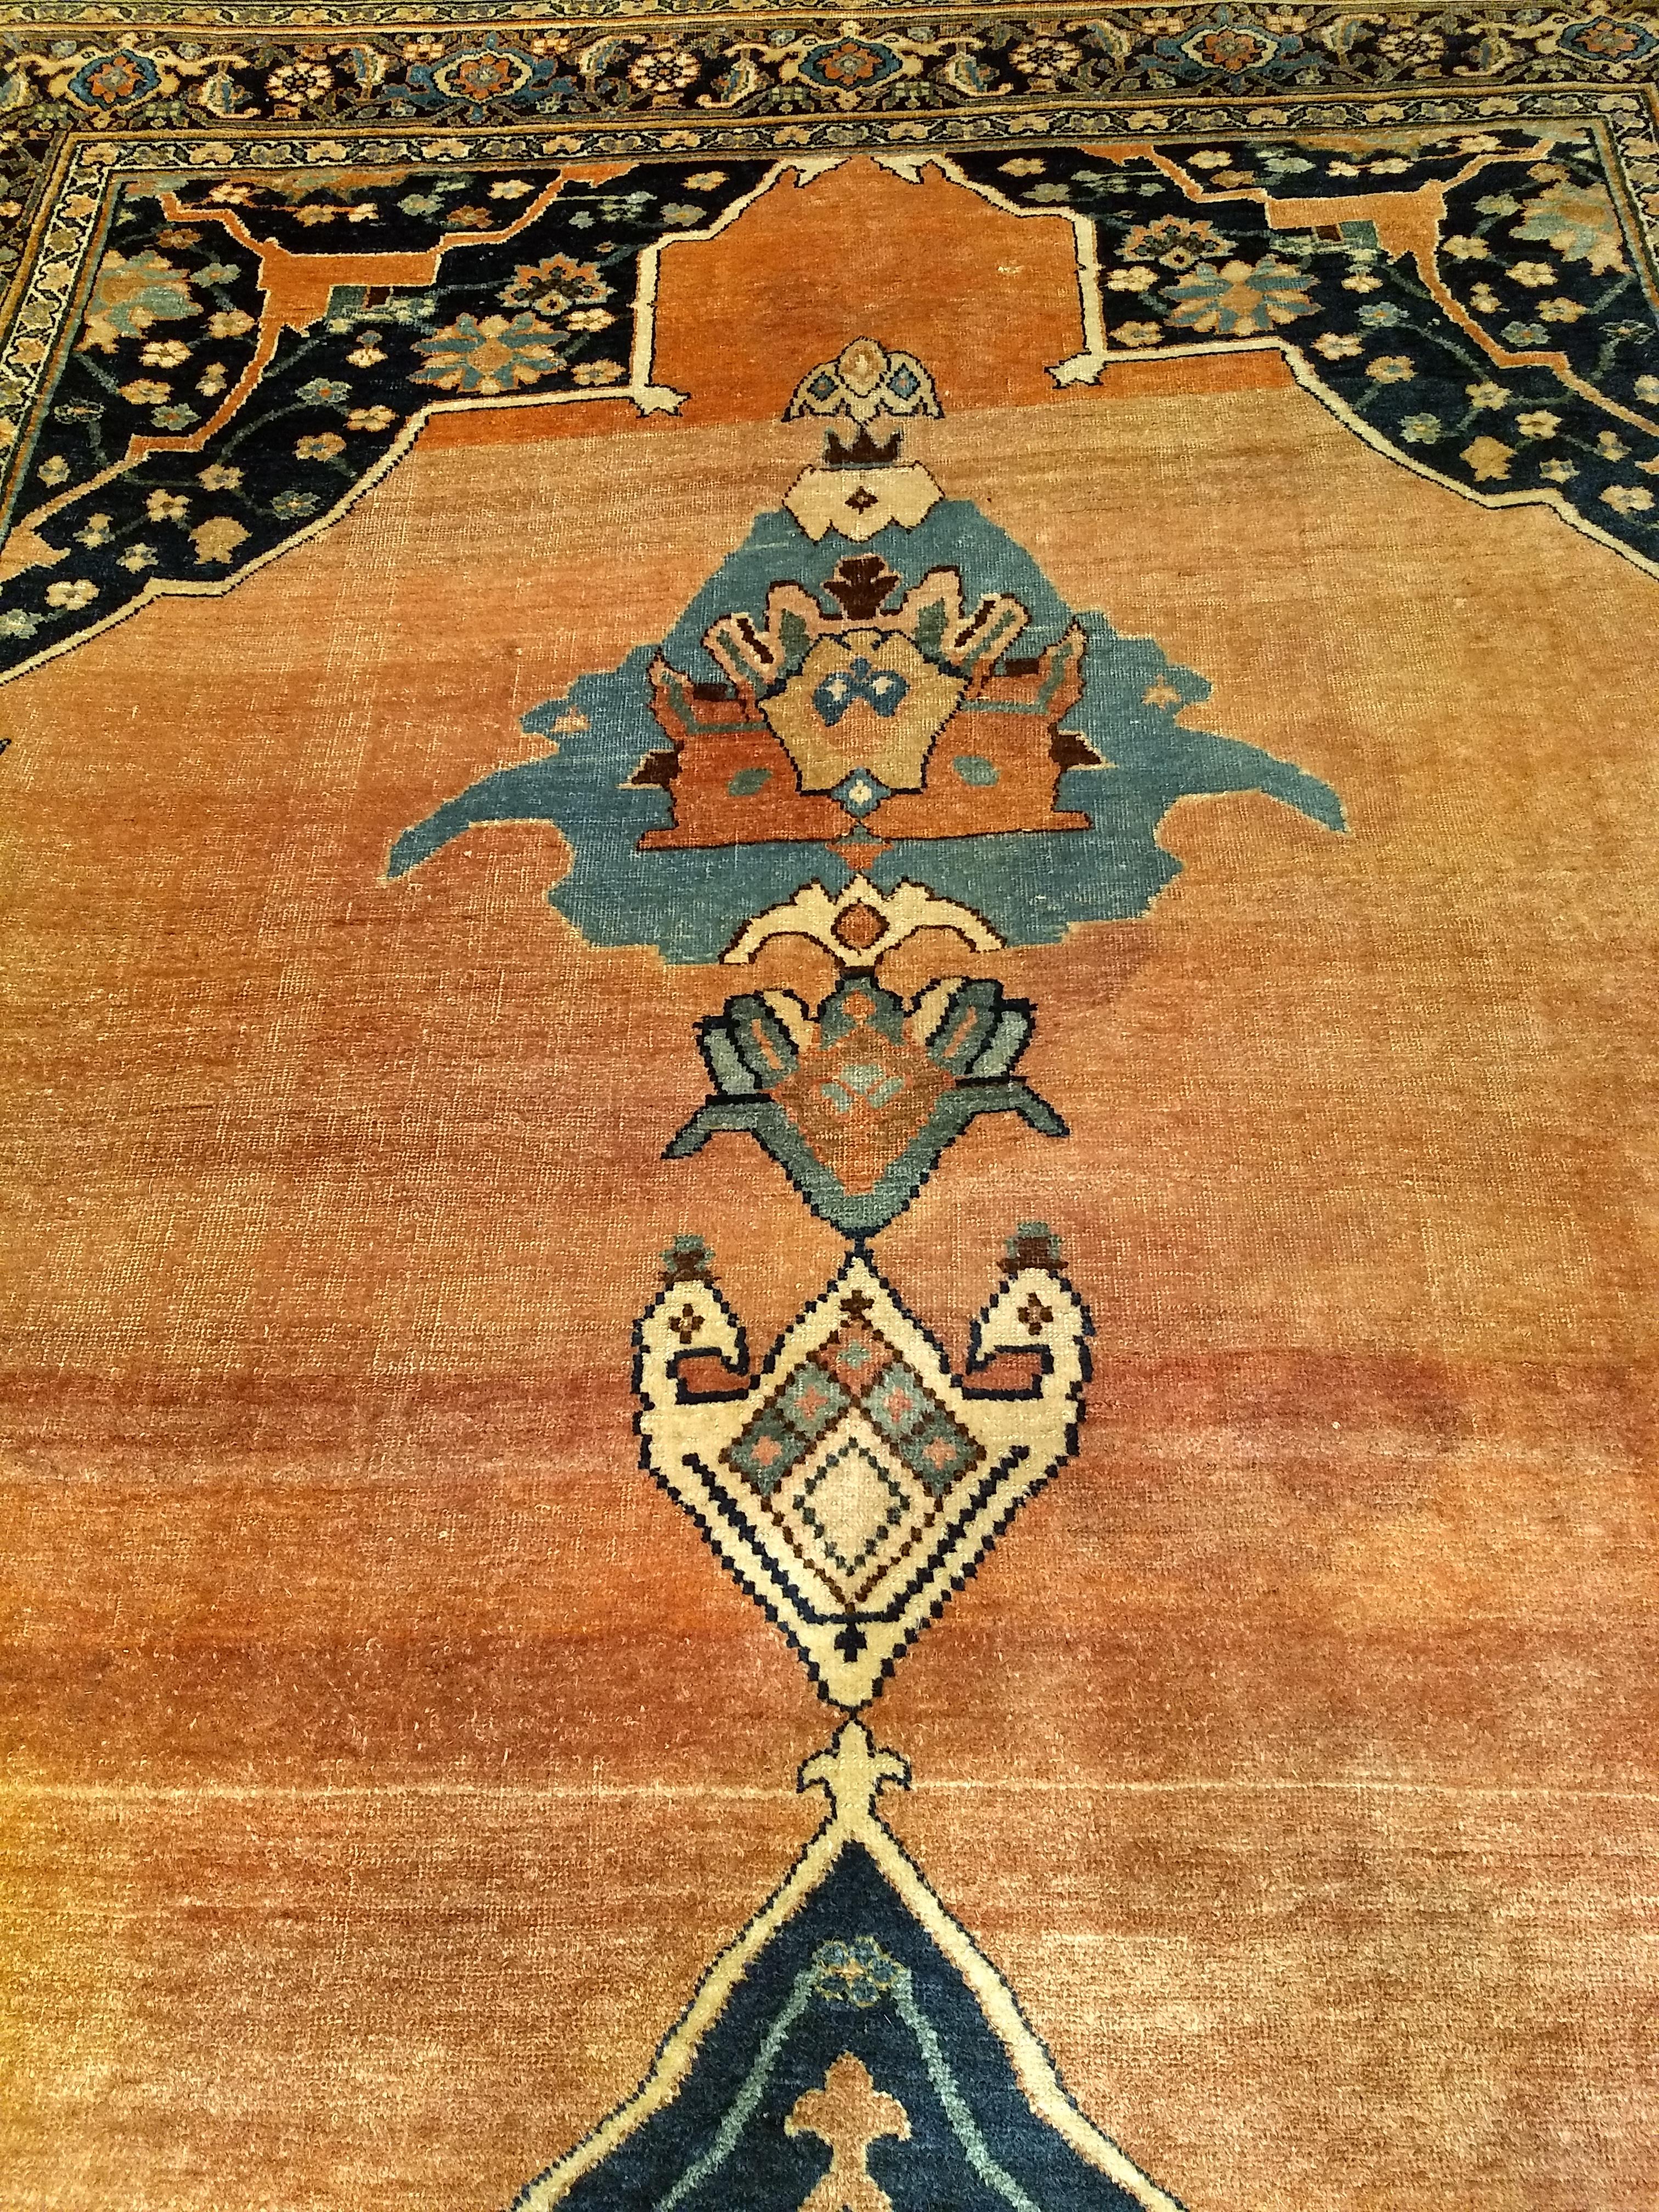 19th Century Persian Bidjar Gallery Rug in Brick-Red, Navy, Turquoise, Yellow For Sale 1